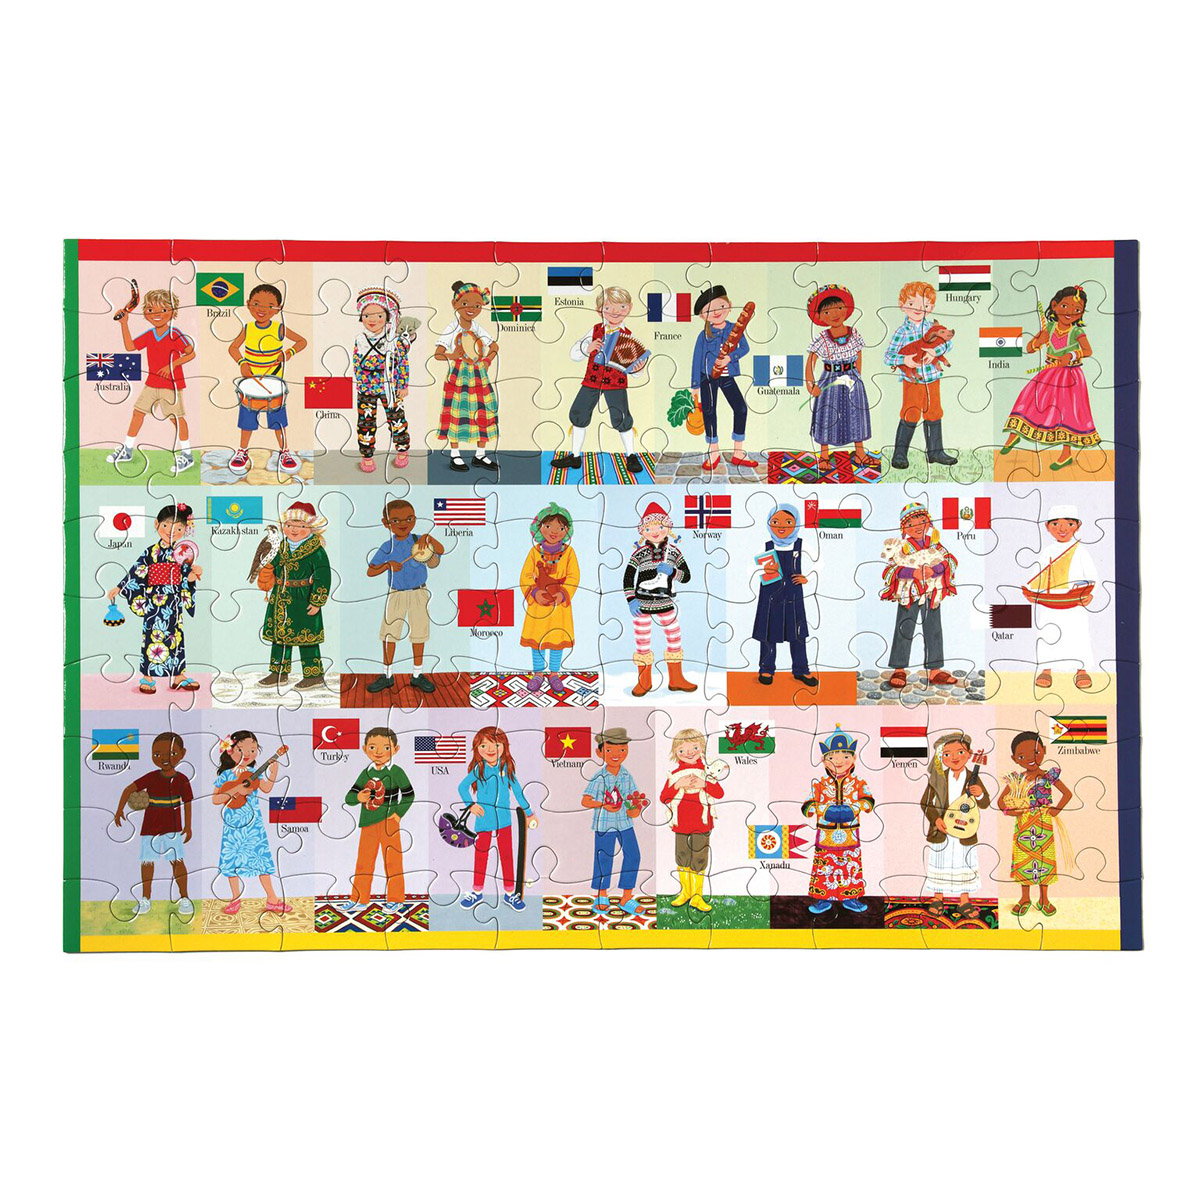 Children of the World - Scratch and Dent People Jigsaw Puzzle